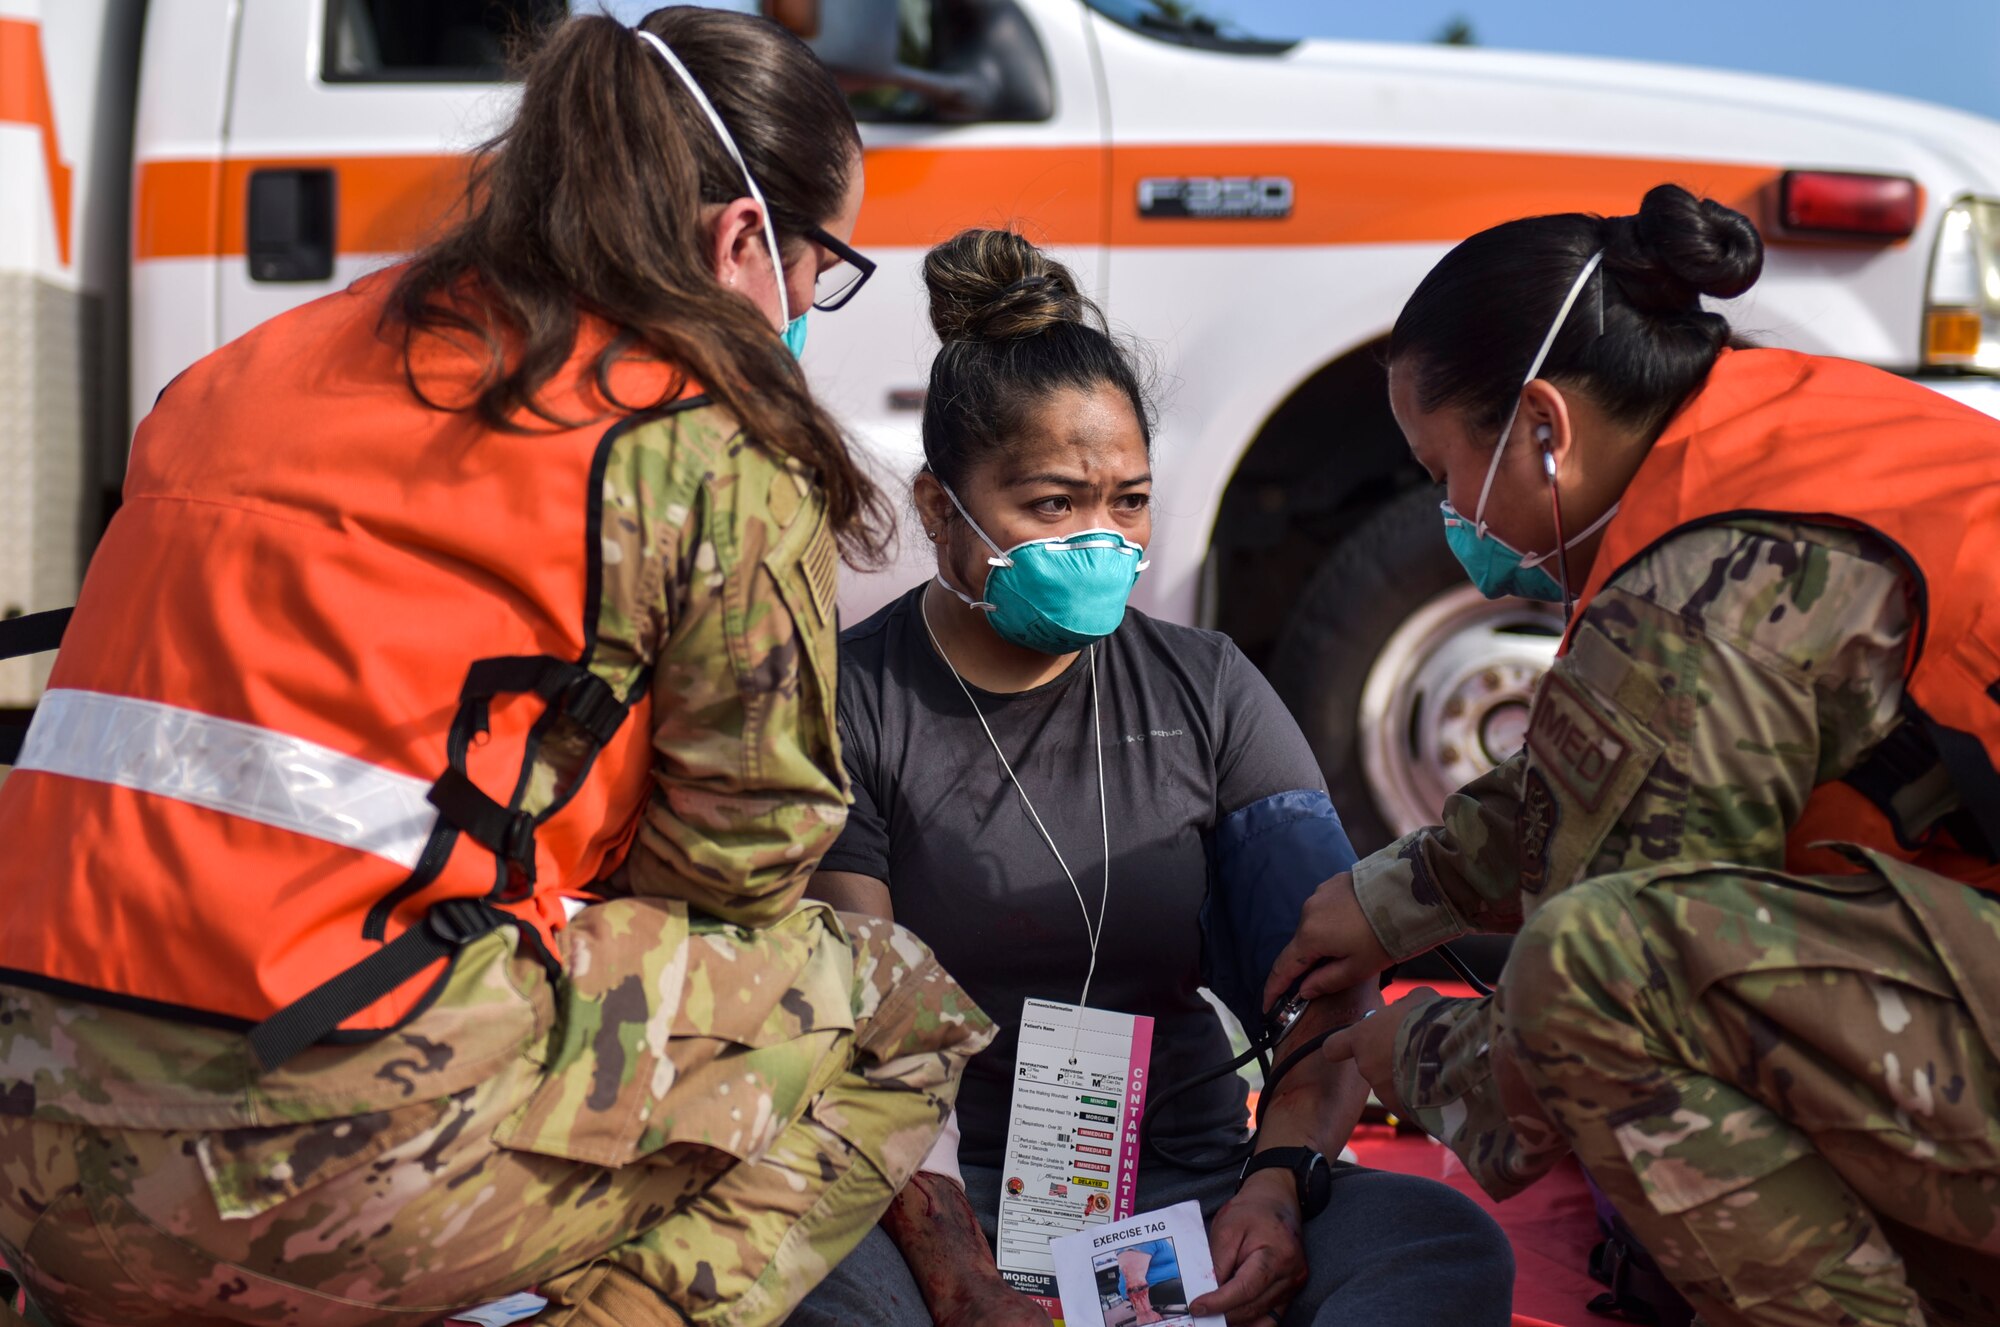 Members of the 92nd Medical Group treat a simulated patient during Exercise Ready Eagle at Fairchild Air Force Base, Washington, Aug. 27, 2021.